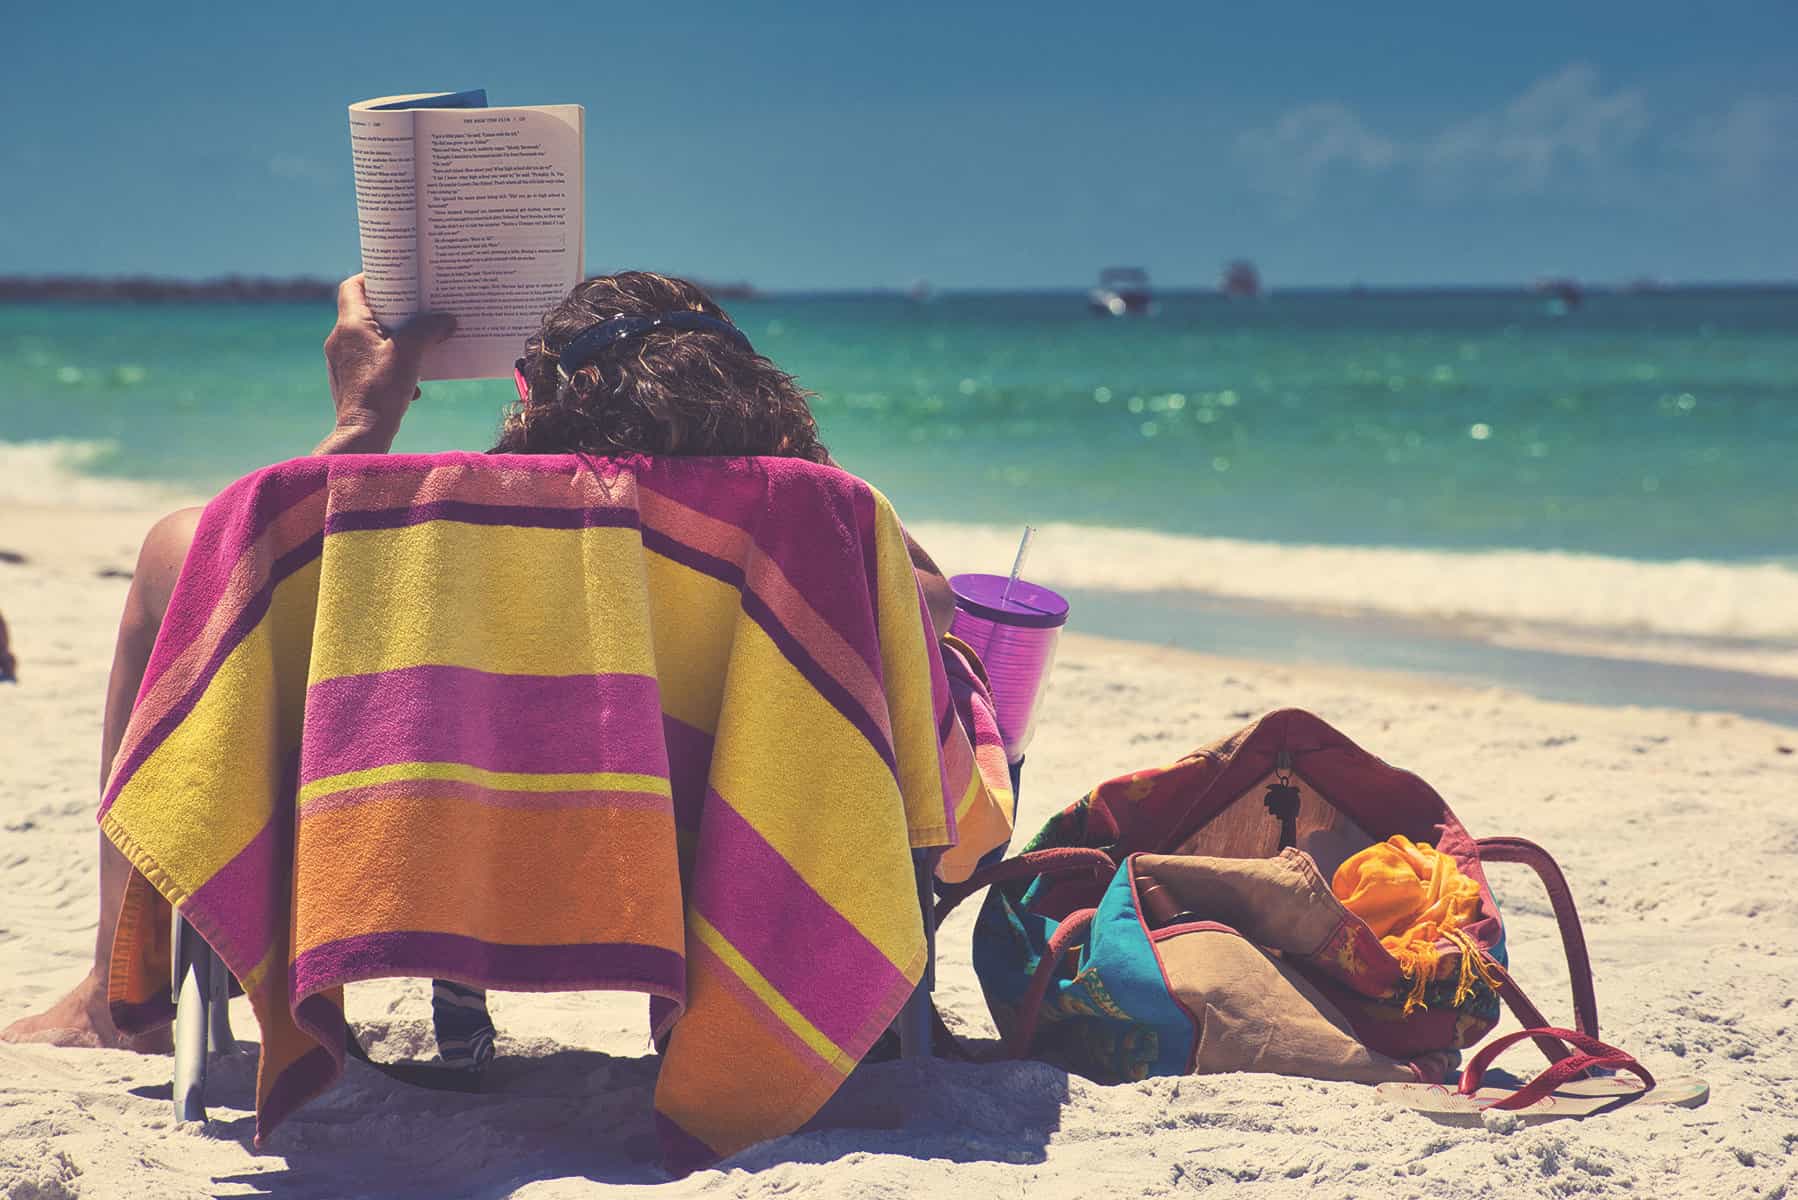 A person sitting on a beach chair, covered with a cozy towel, reading a book and enjoying the beach.